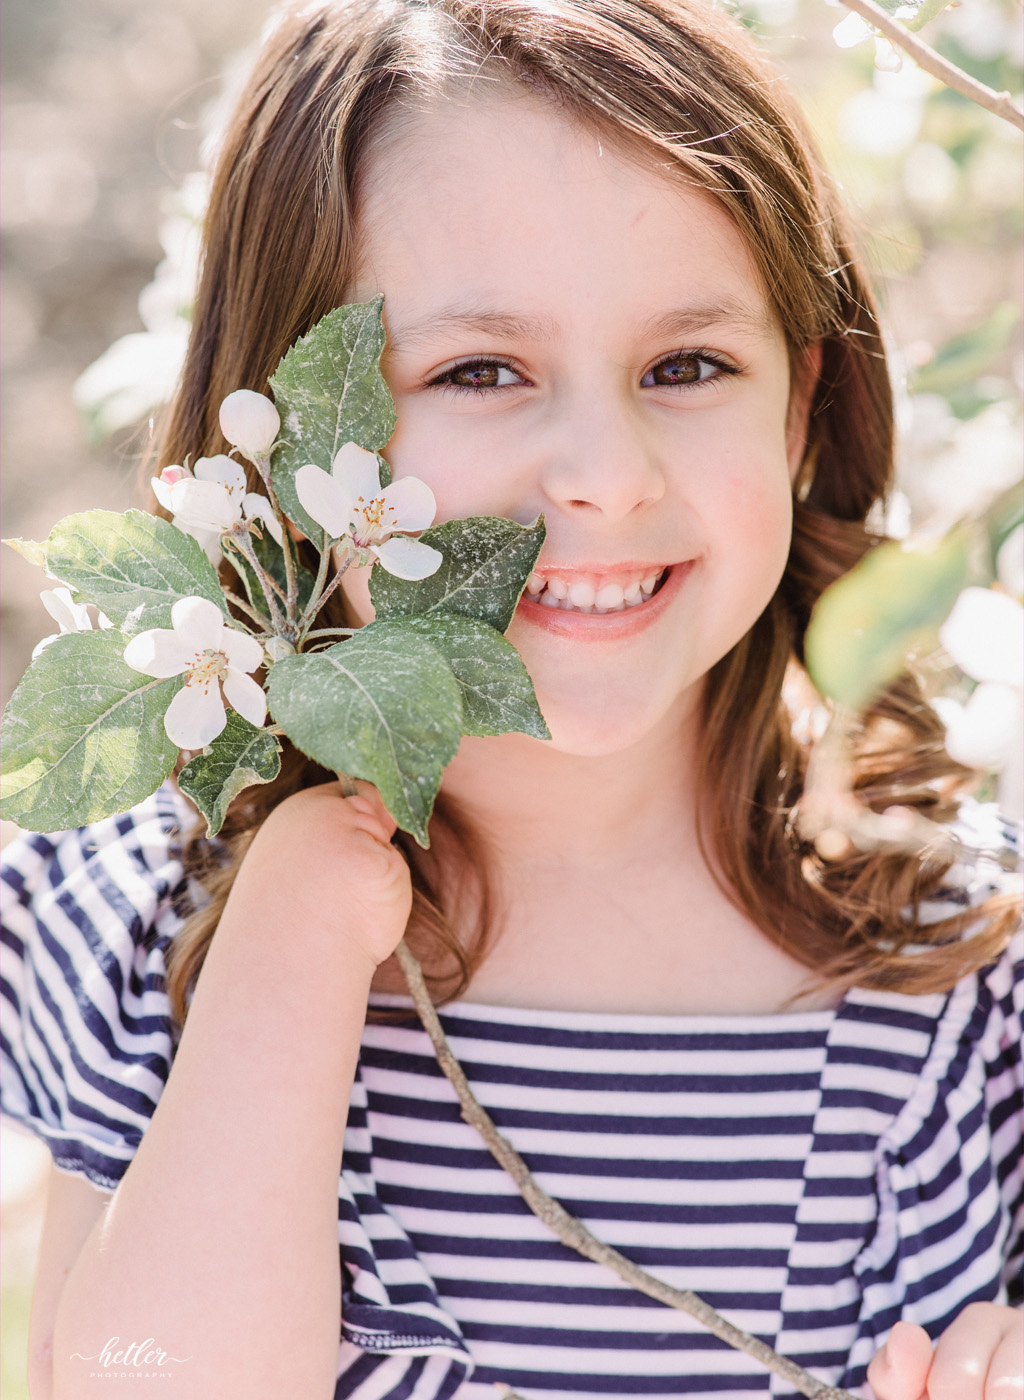 Grand Rapids Michigan children session at an orchard full of apple blossoms